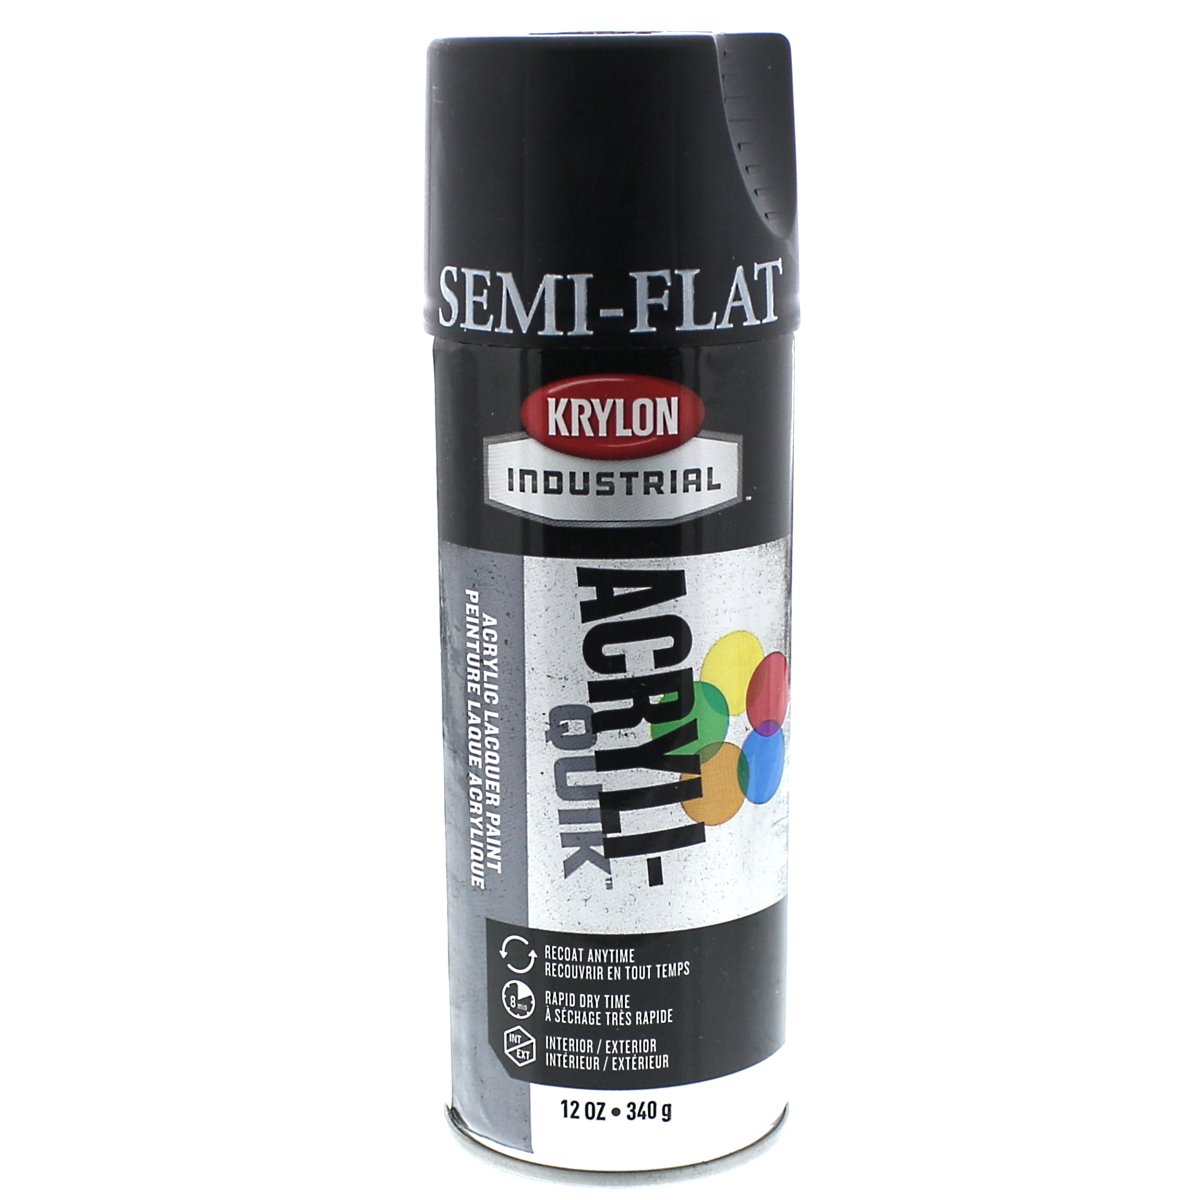 Krylon Lacquer Spray Paint: Leather Brown, Gloss, 16 oz - Outdoor, Use on Cabinets, Color Coding Steel & Lumber, Conduits, Drums, Ducts, Furniture